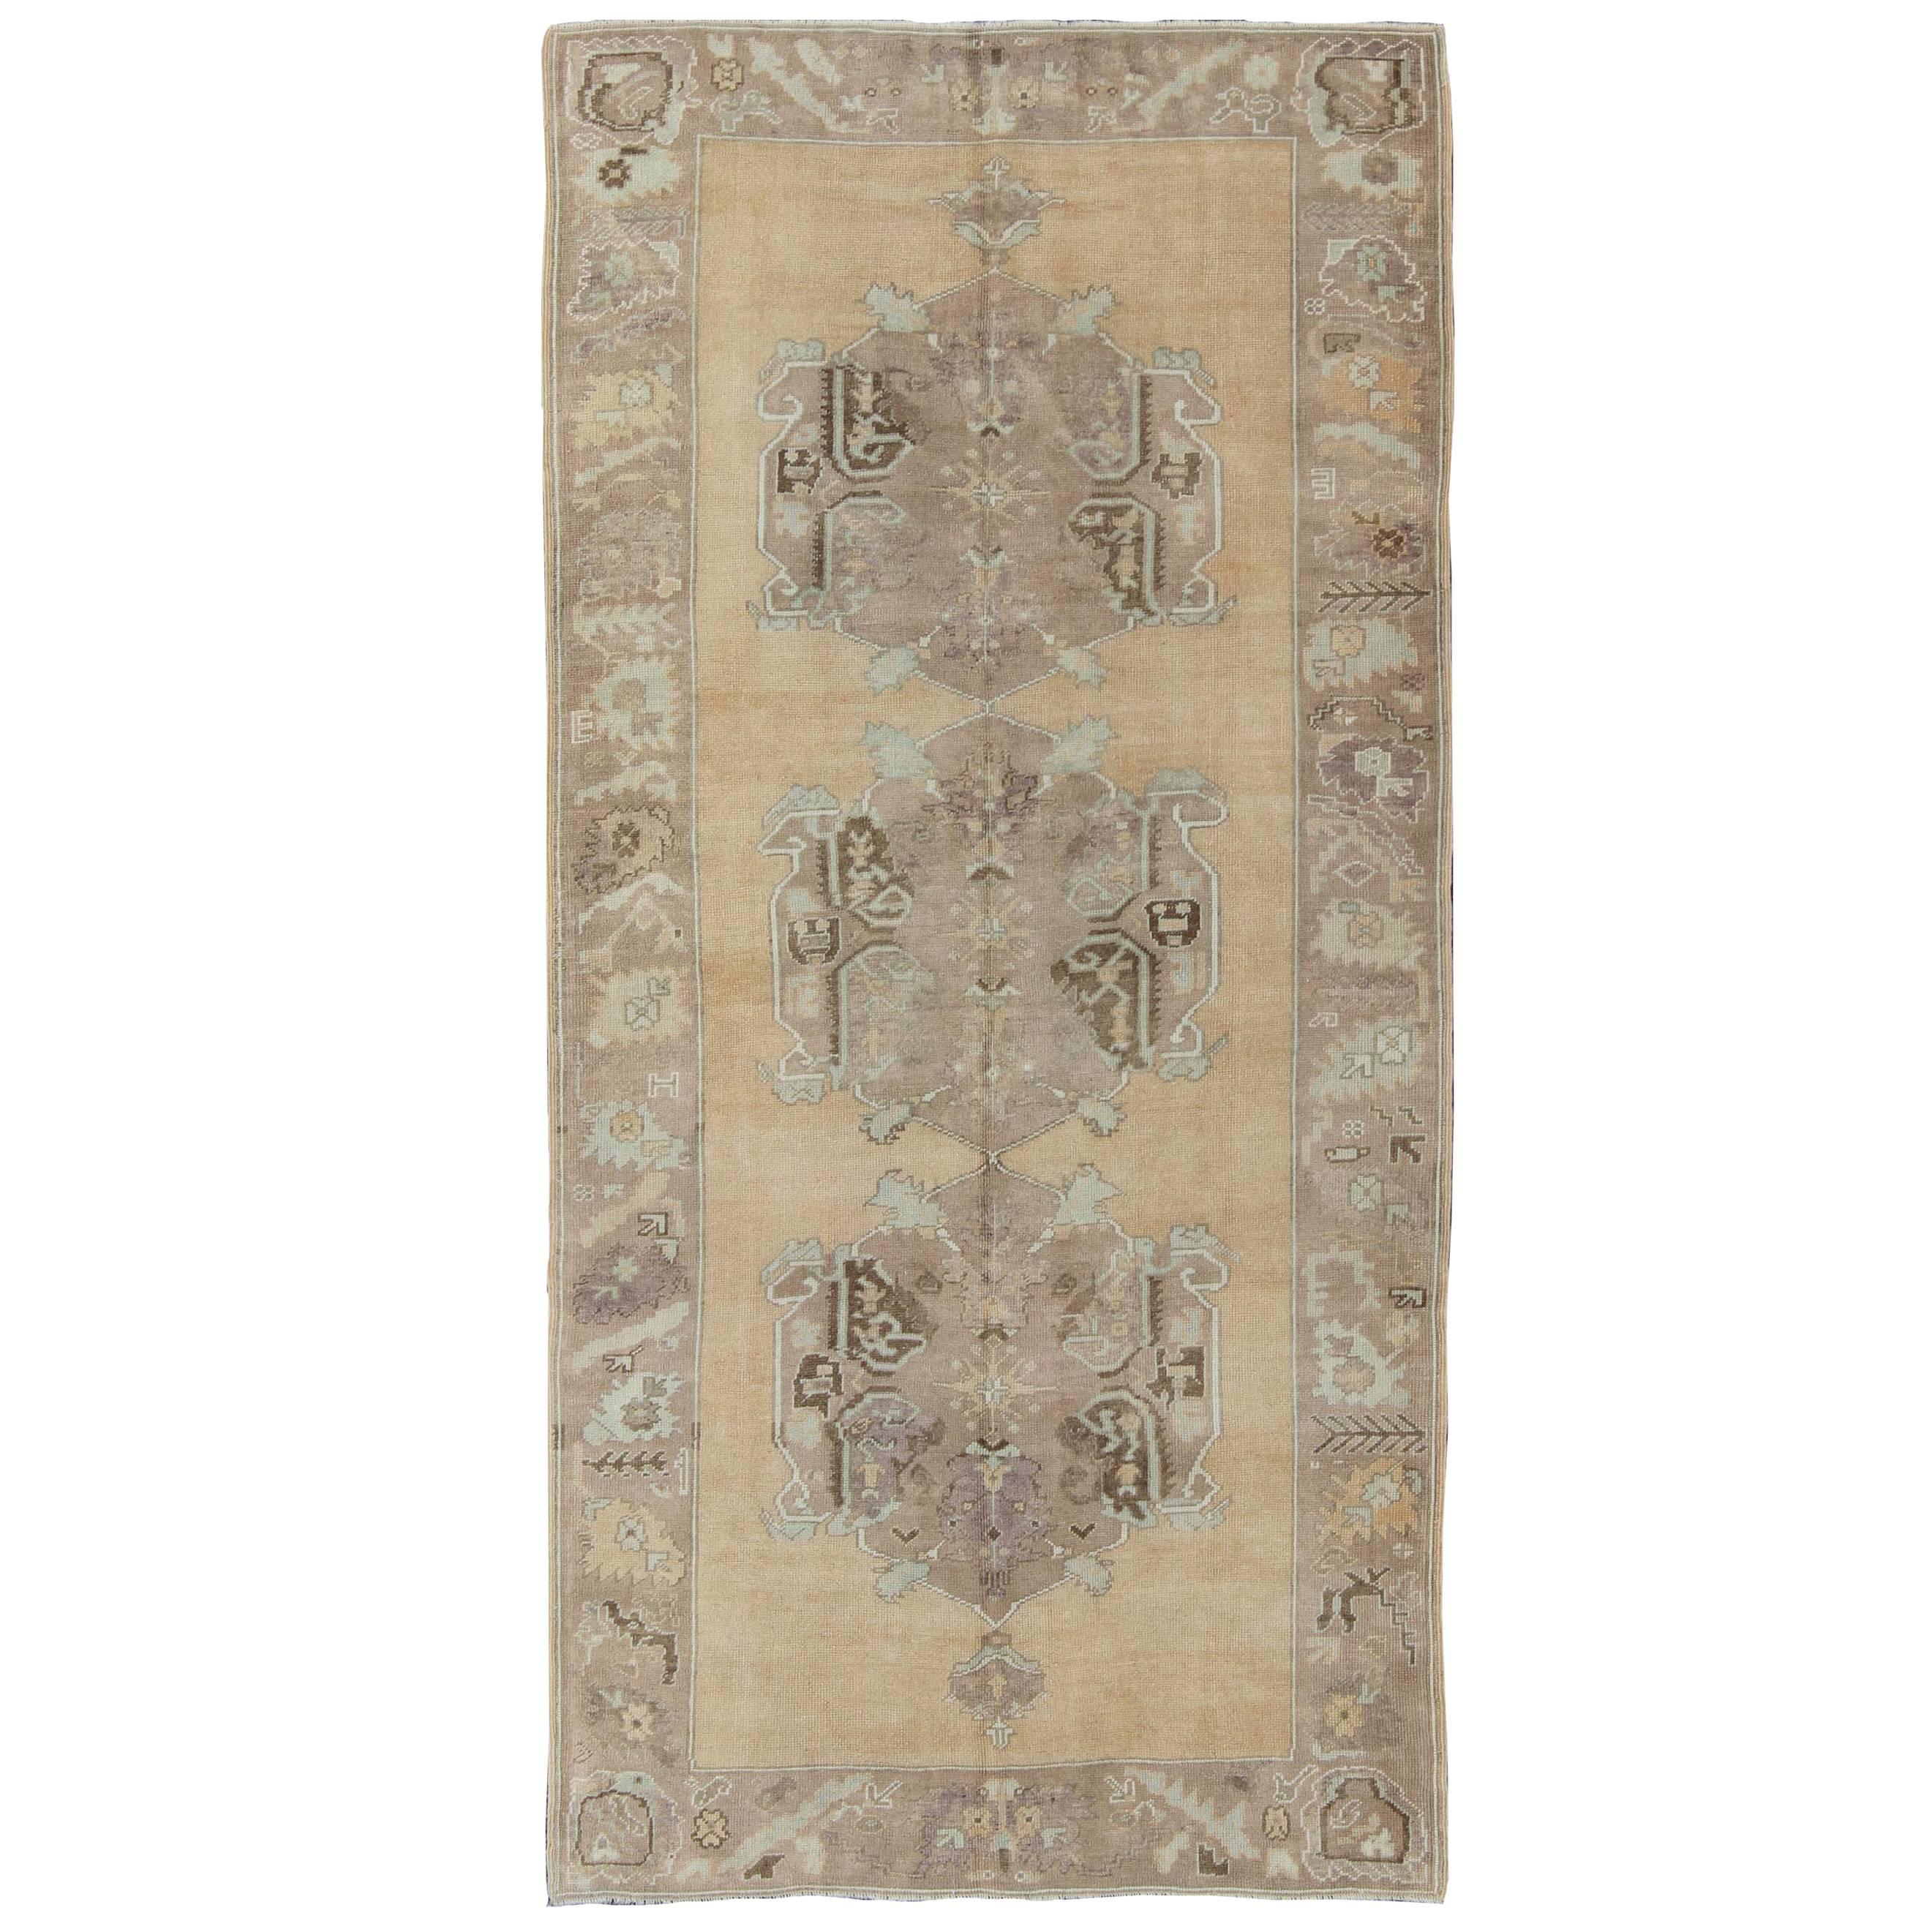 Vintage Oushak Rug with Three Central Medallions Set on Faint Sand-Colored Field For Sale